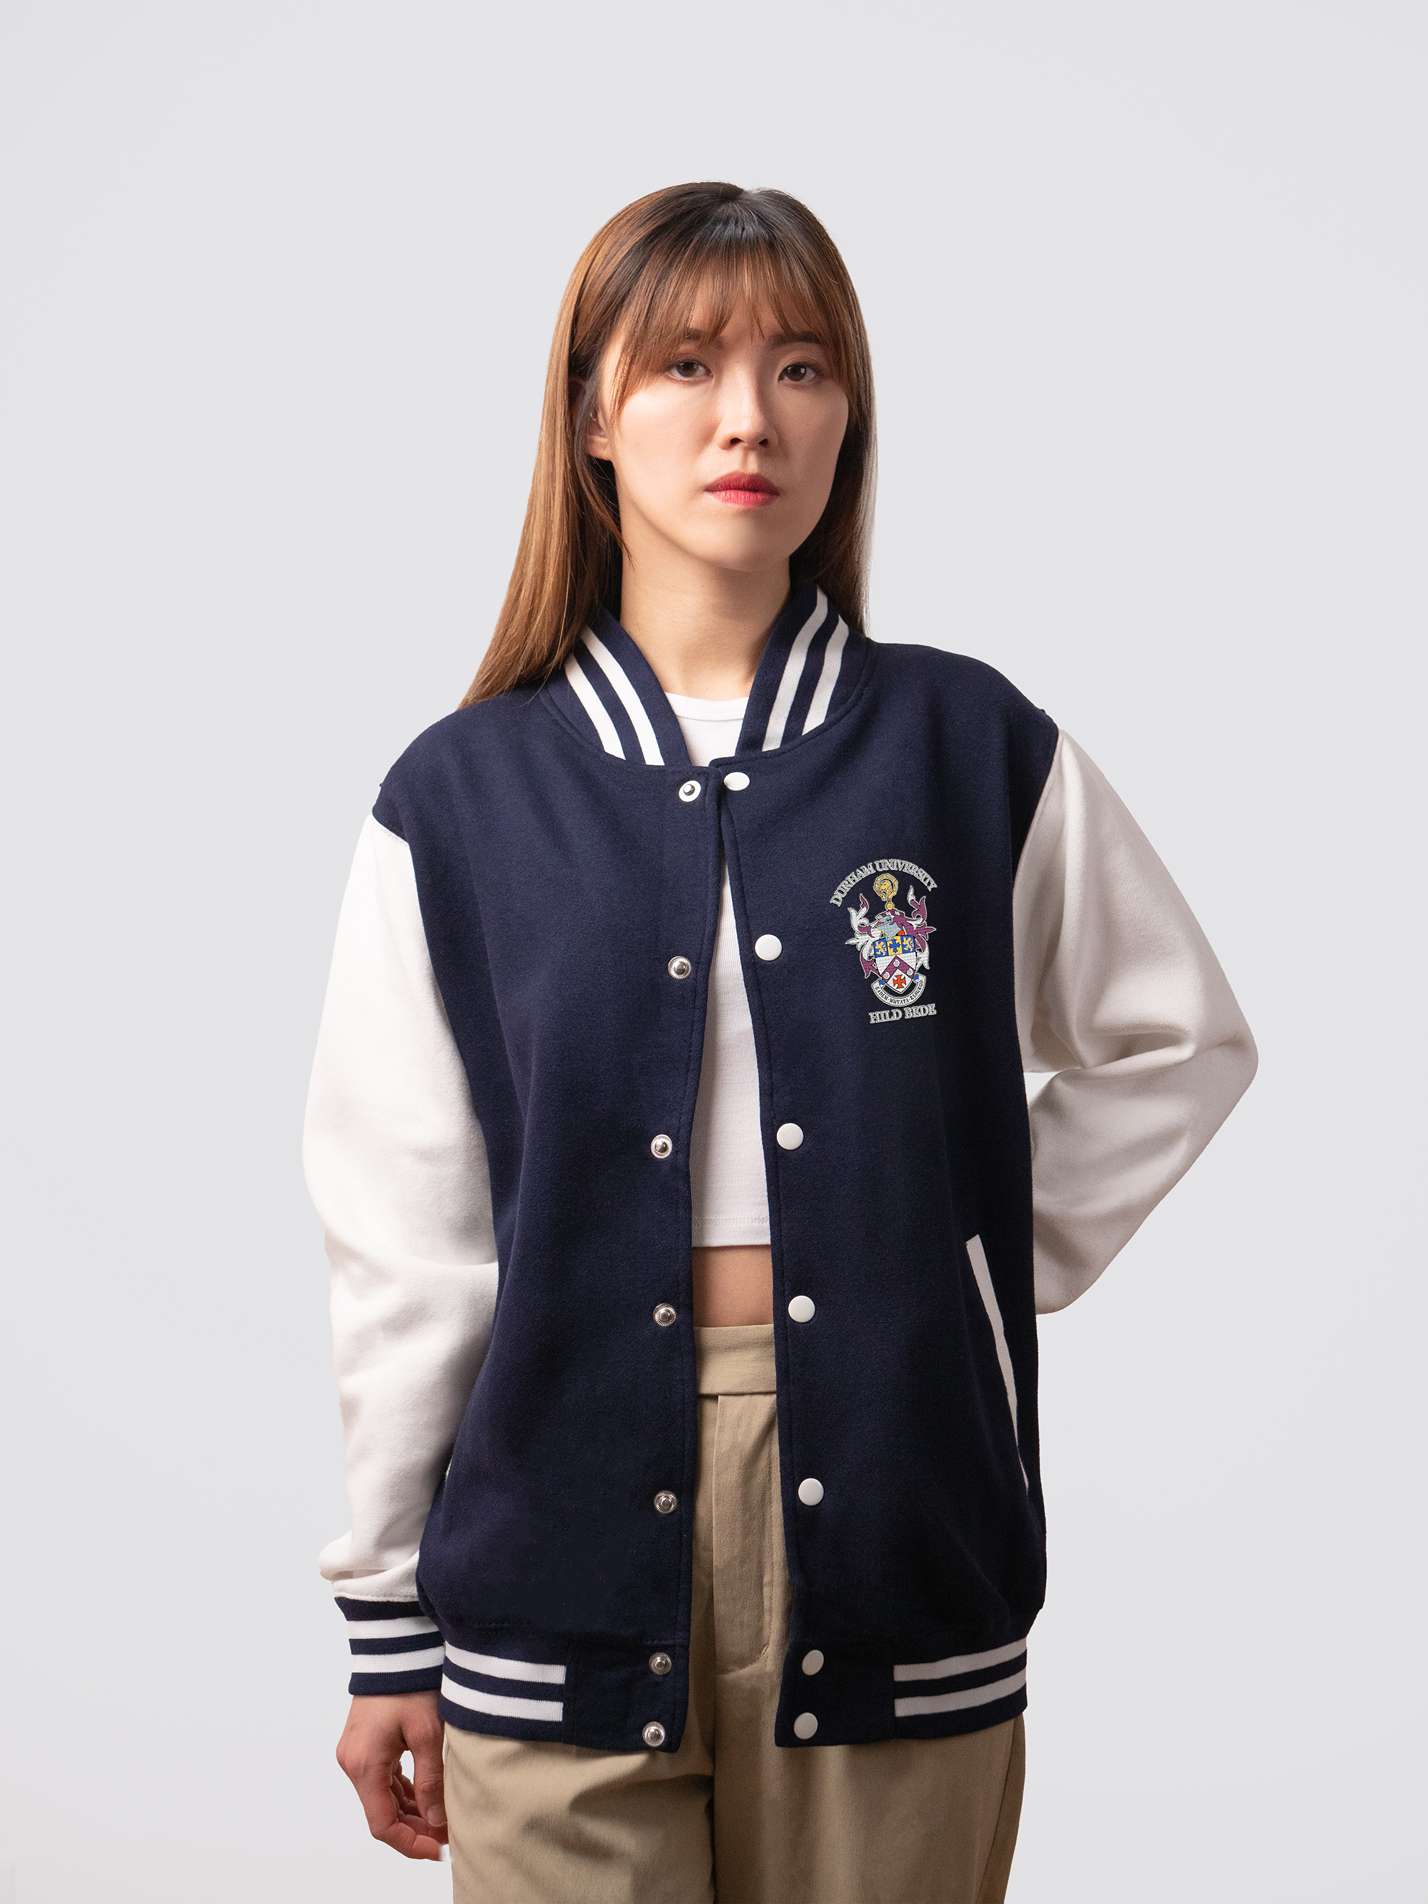 Retro style varsity jacket, with embroidered St Hild and St Bede crest